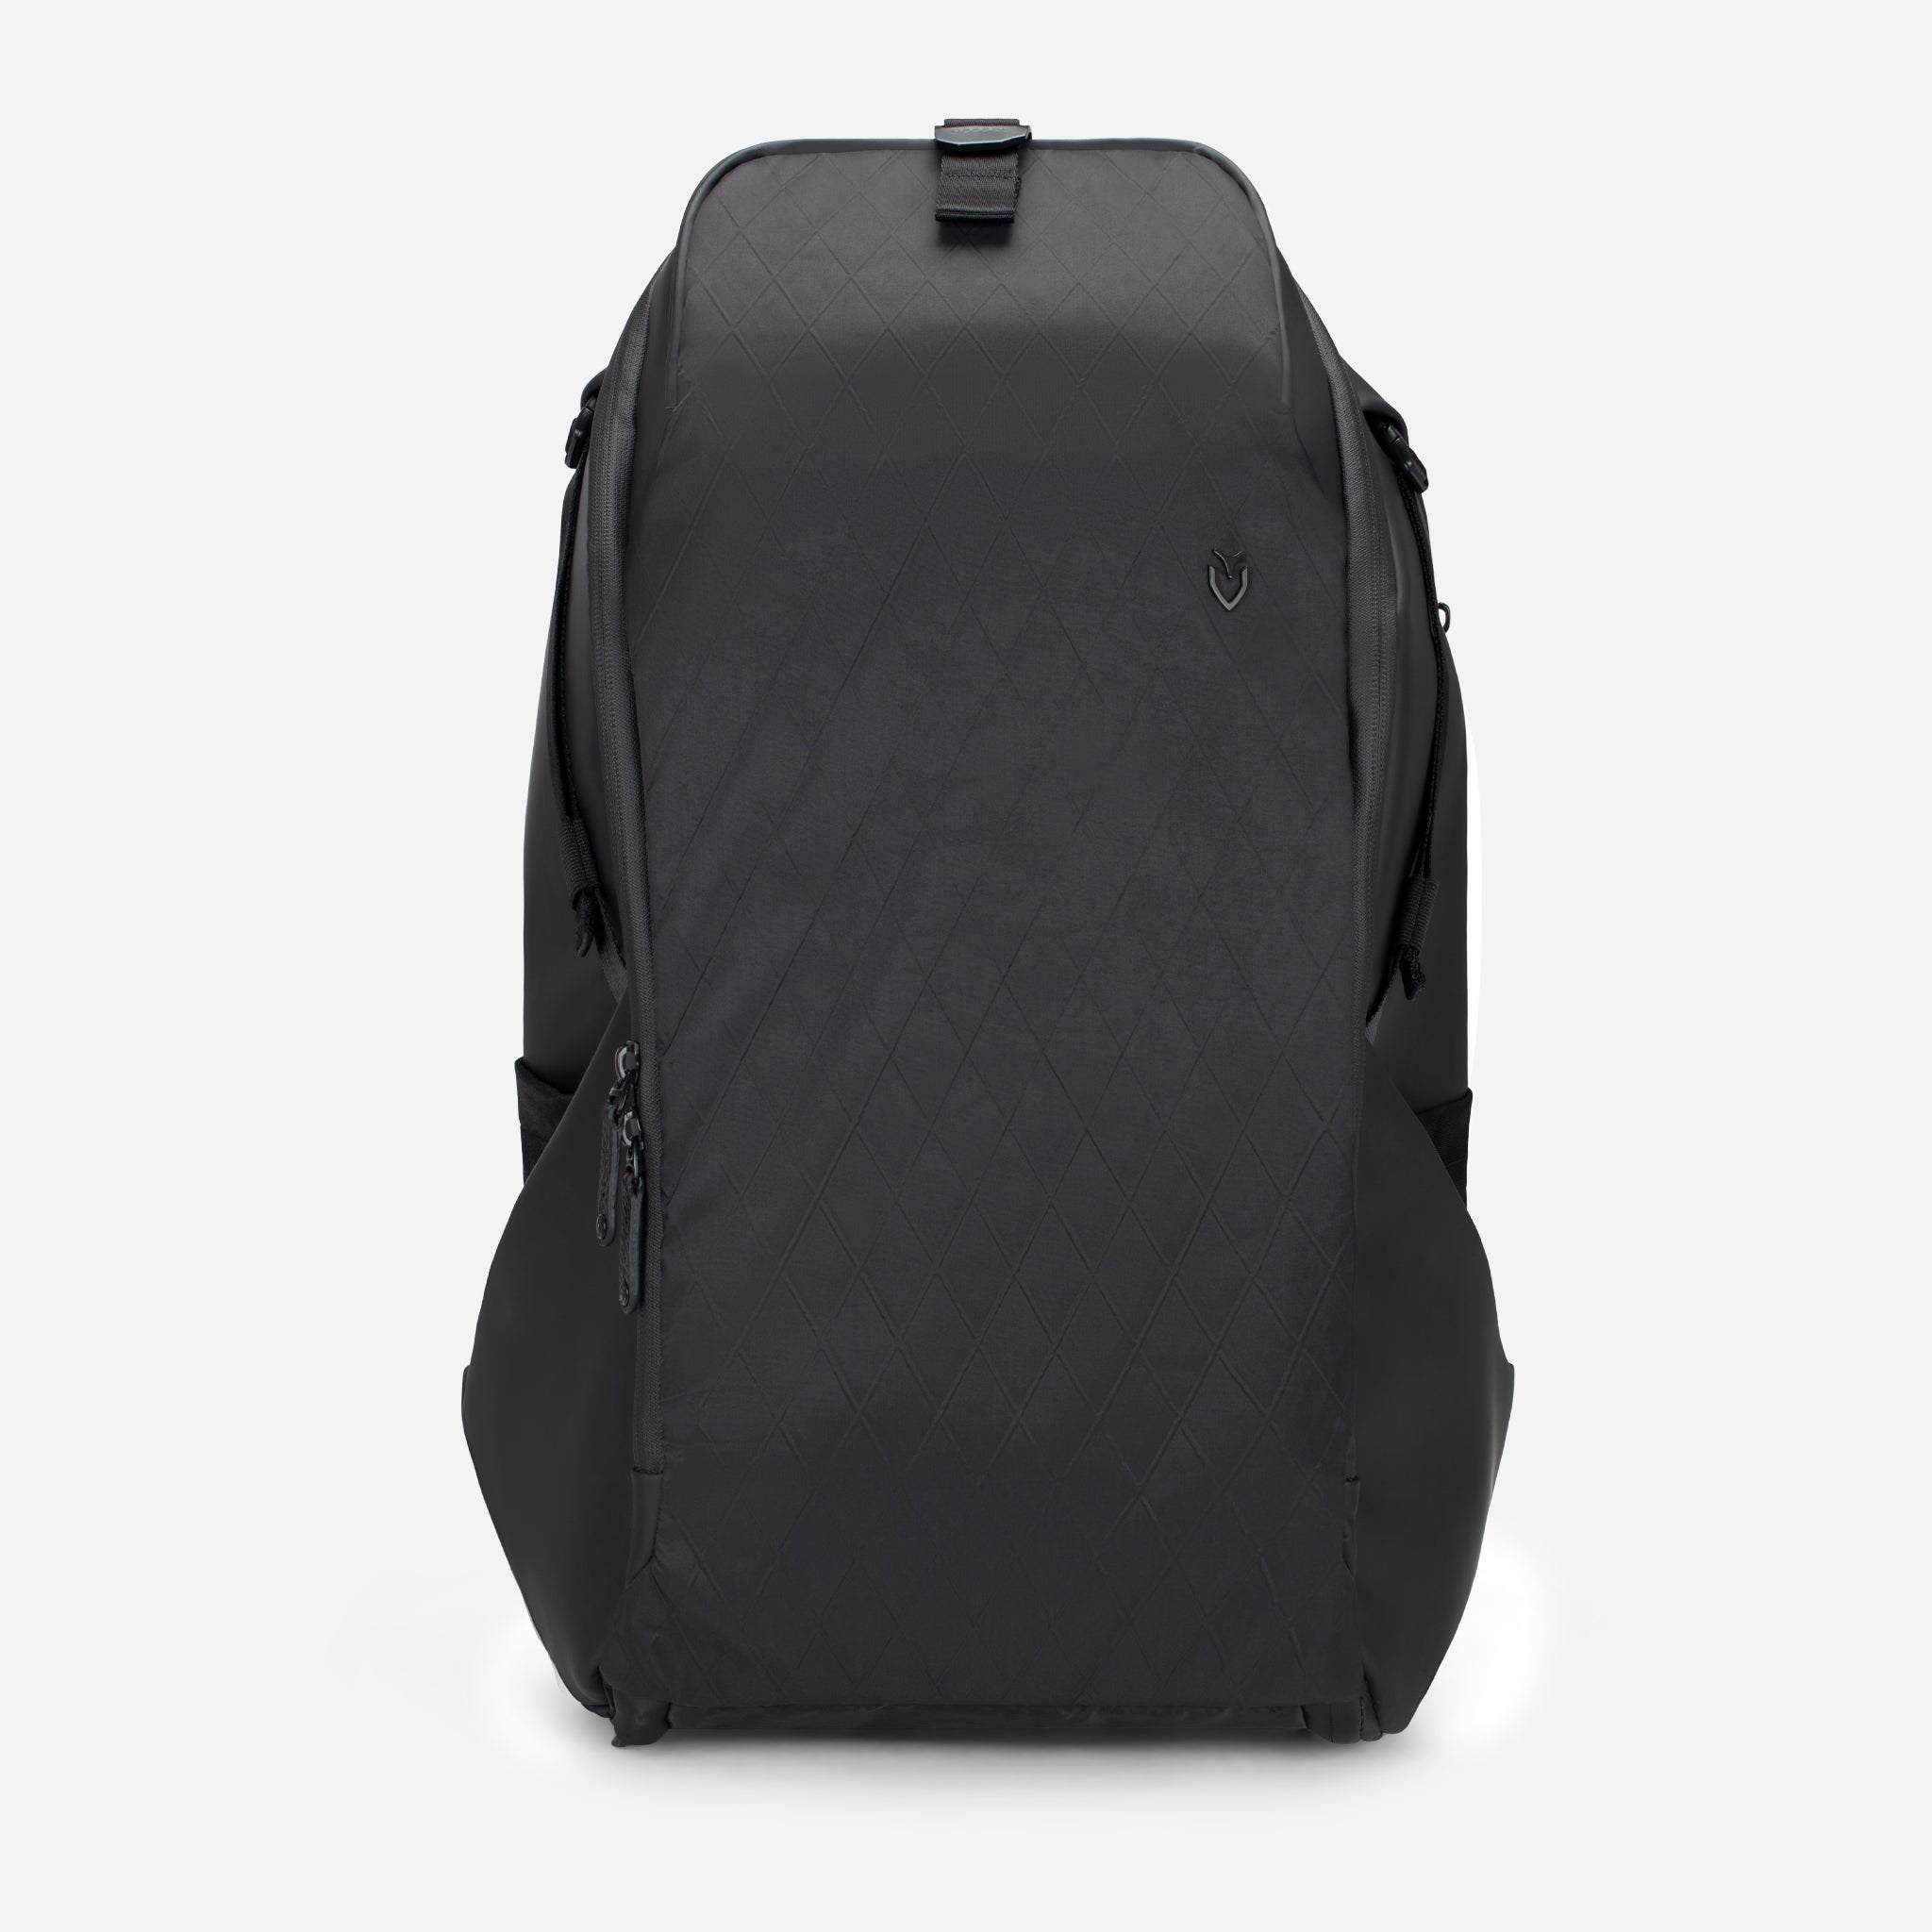 Epic face' Computer Backpack